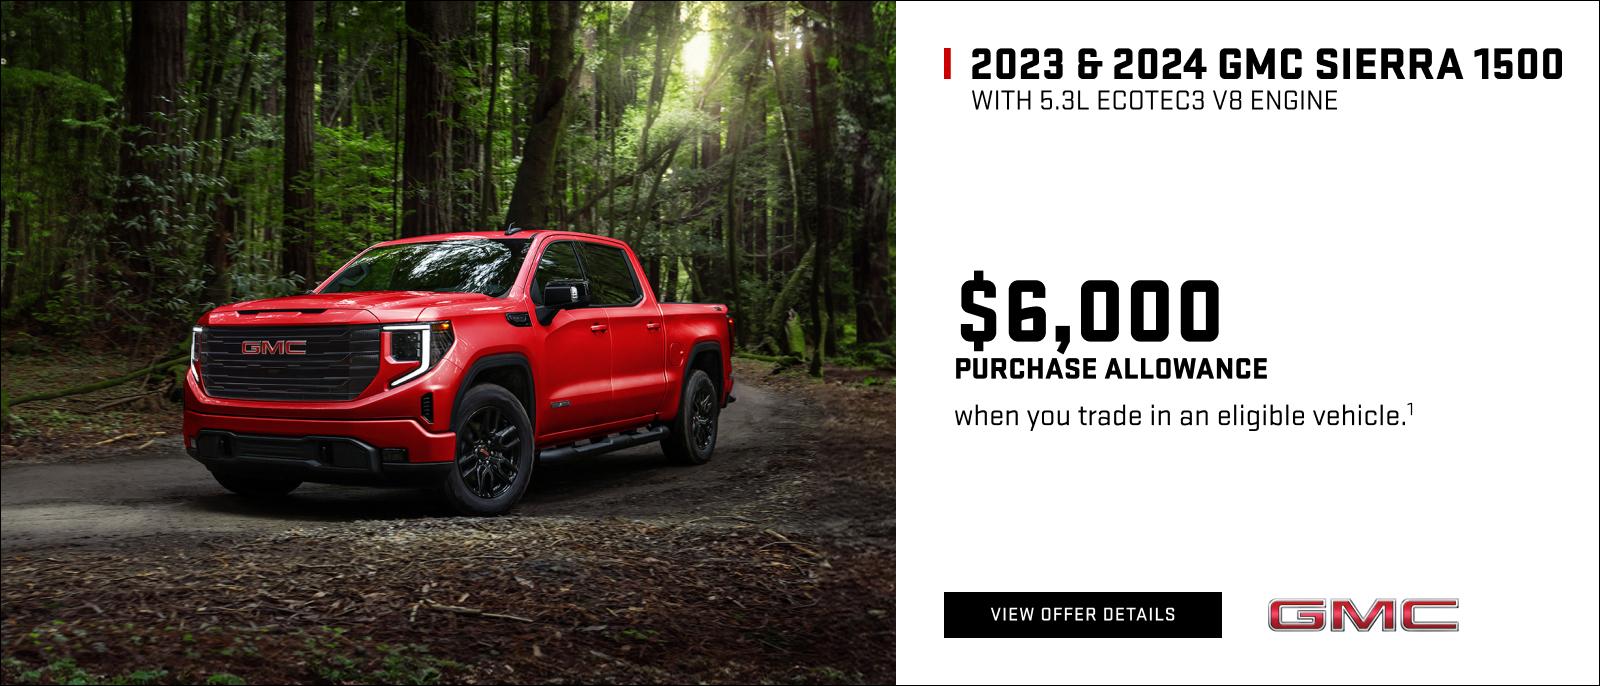 $6,000 PURCHASE ALLOWANCE when you trade in an eligible vehicle.1